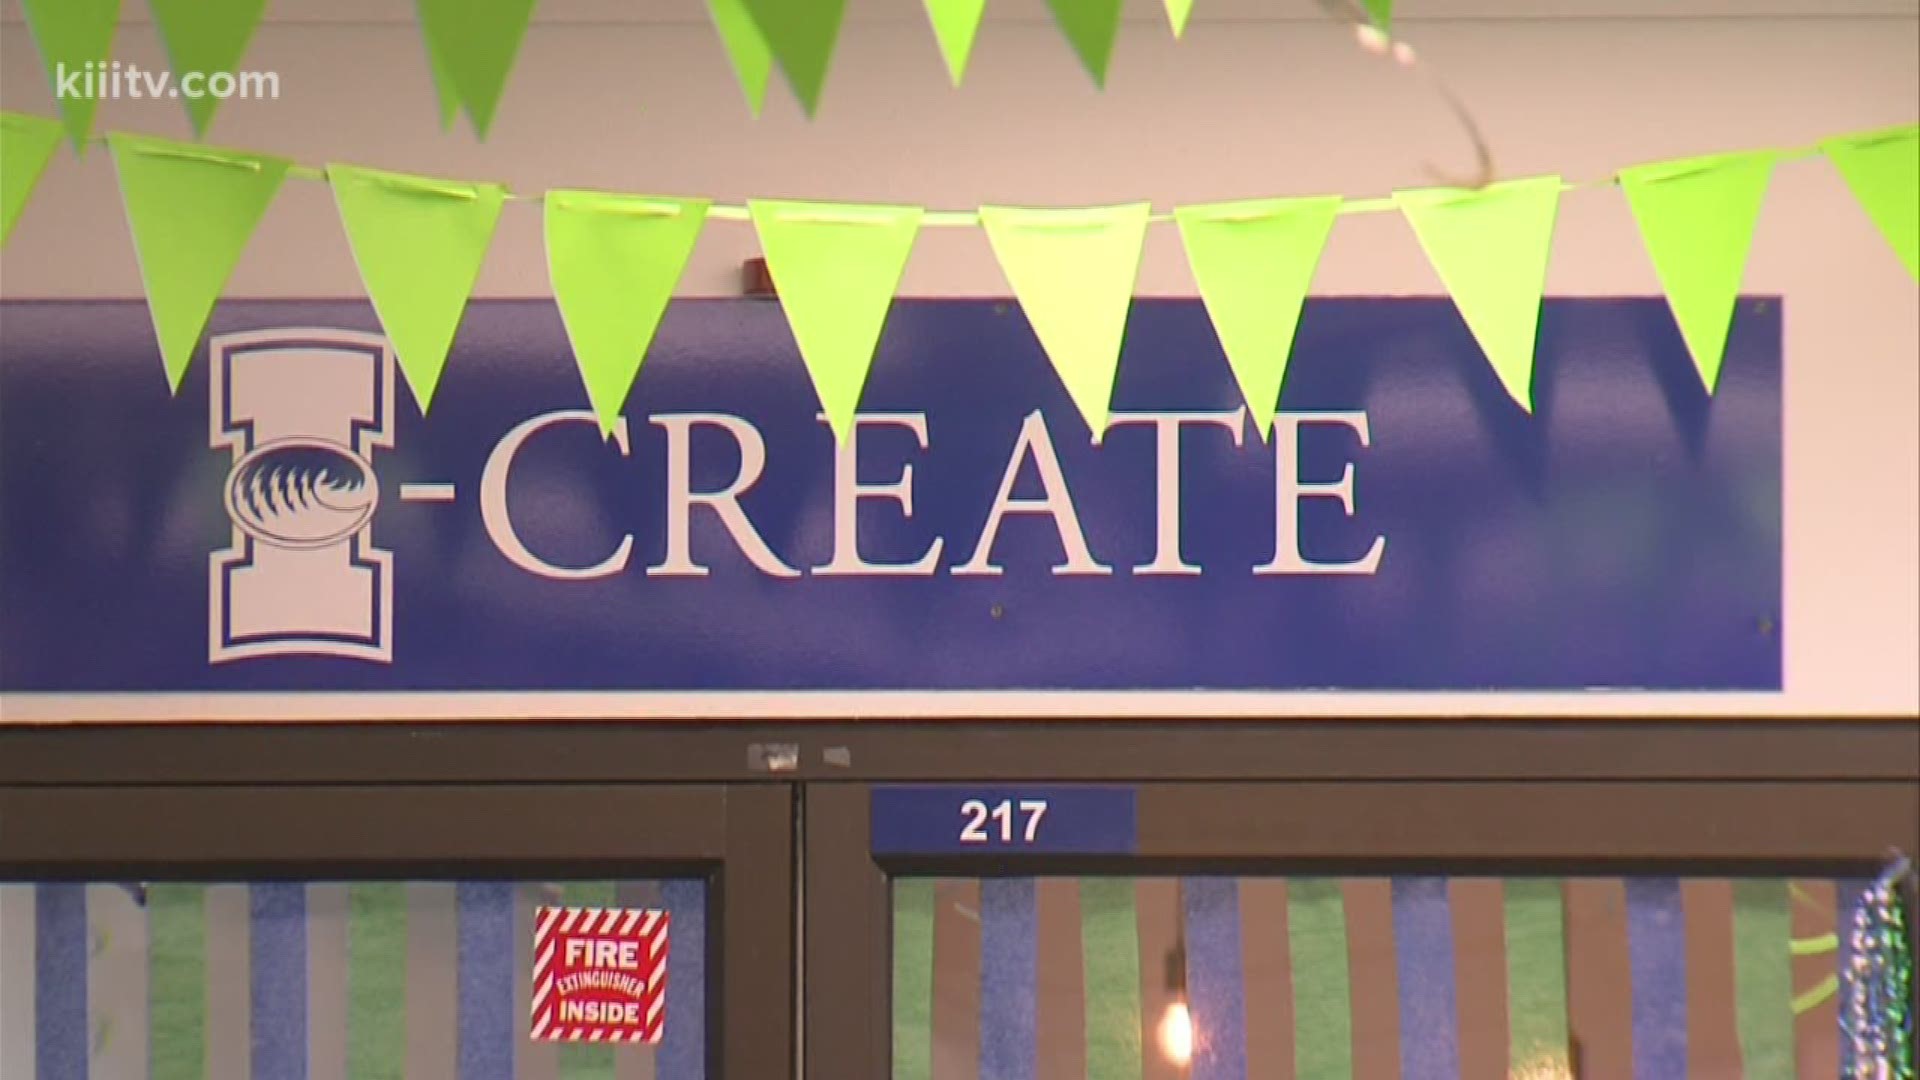 It's called the MakerSpace and it can be found in the I-Create Lab at TAMUCC's library.